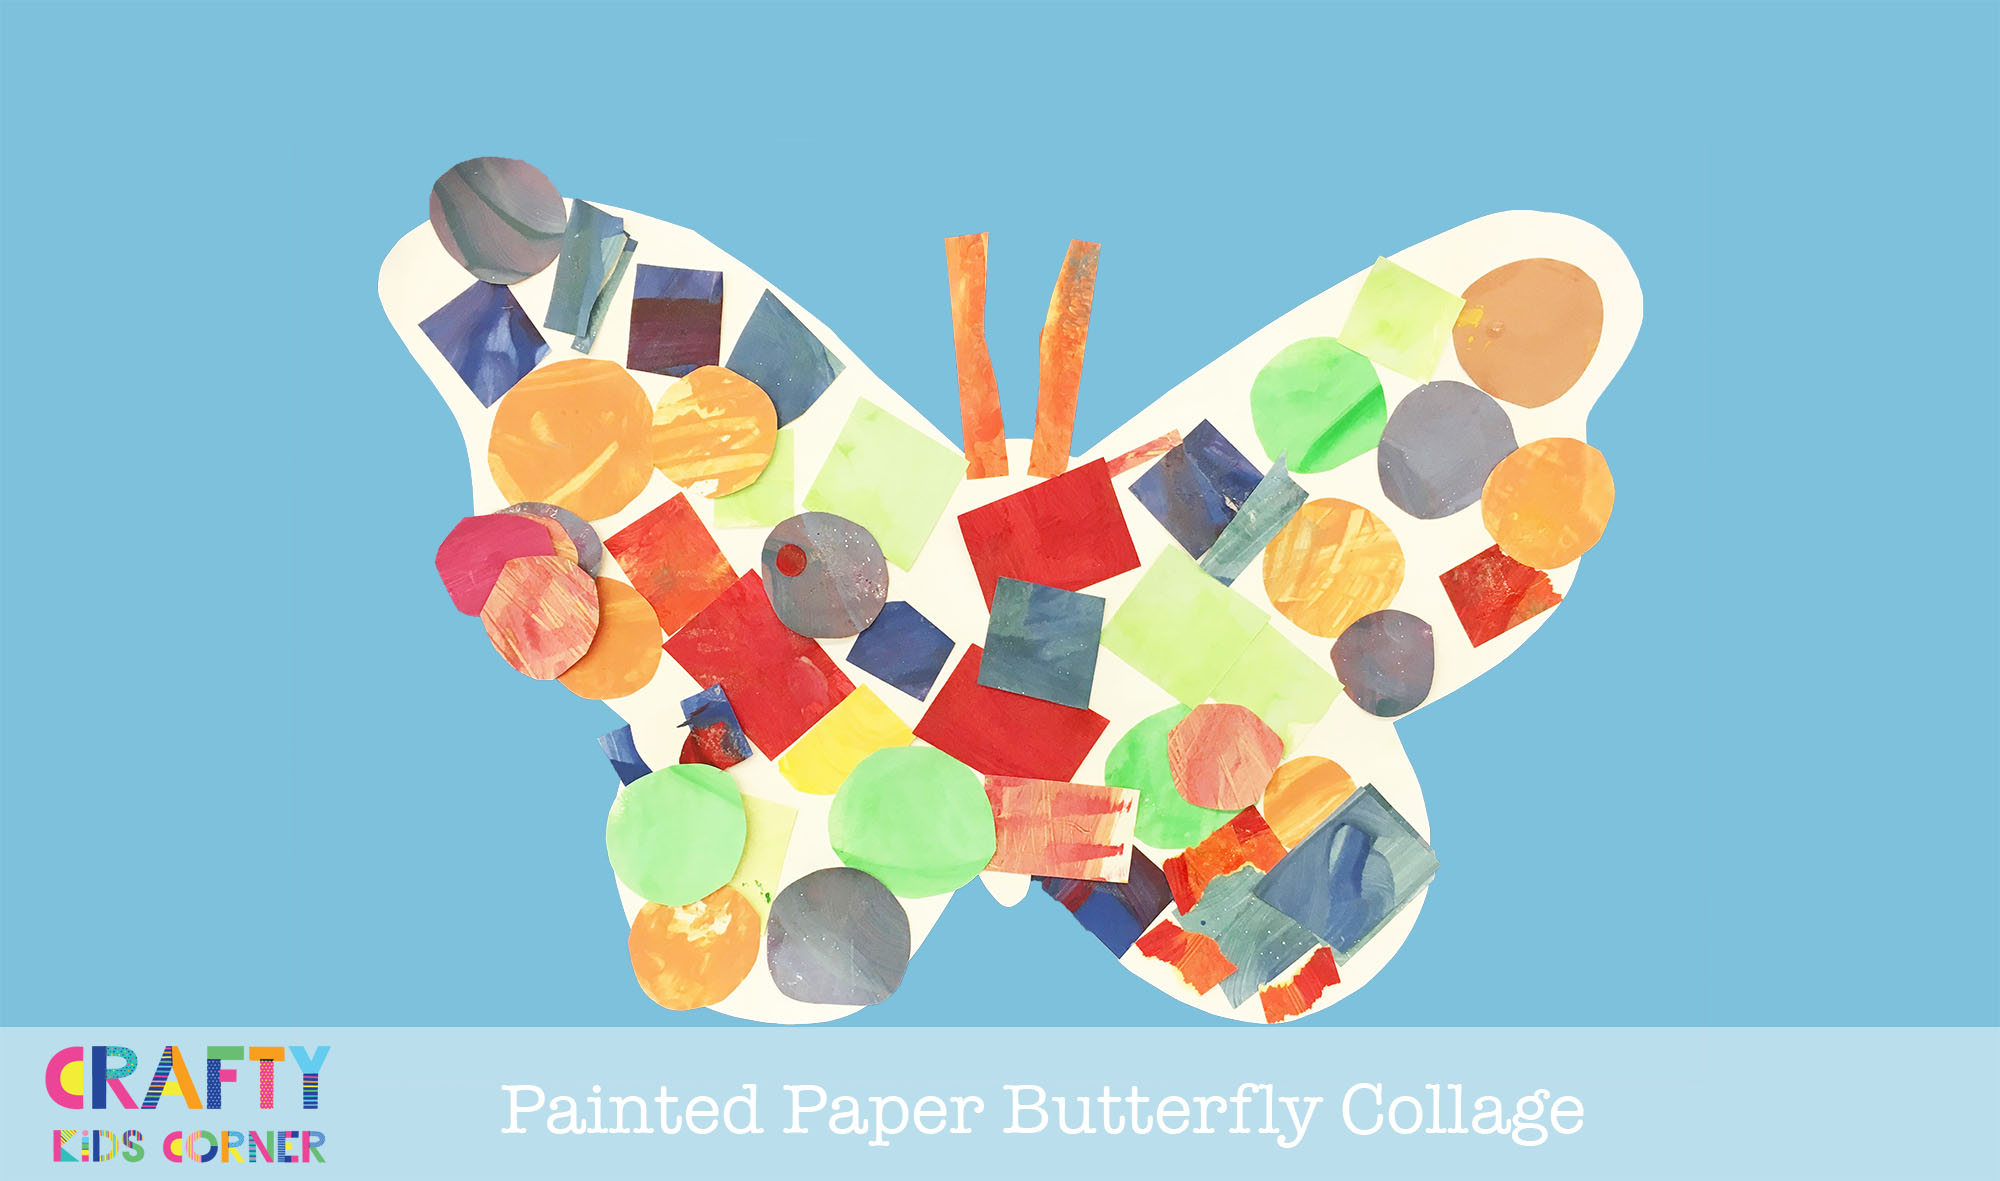 painted paper butterfly collage art for kids by Crafty Kids Corner